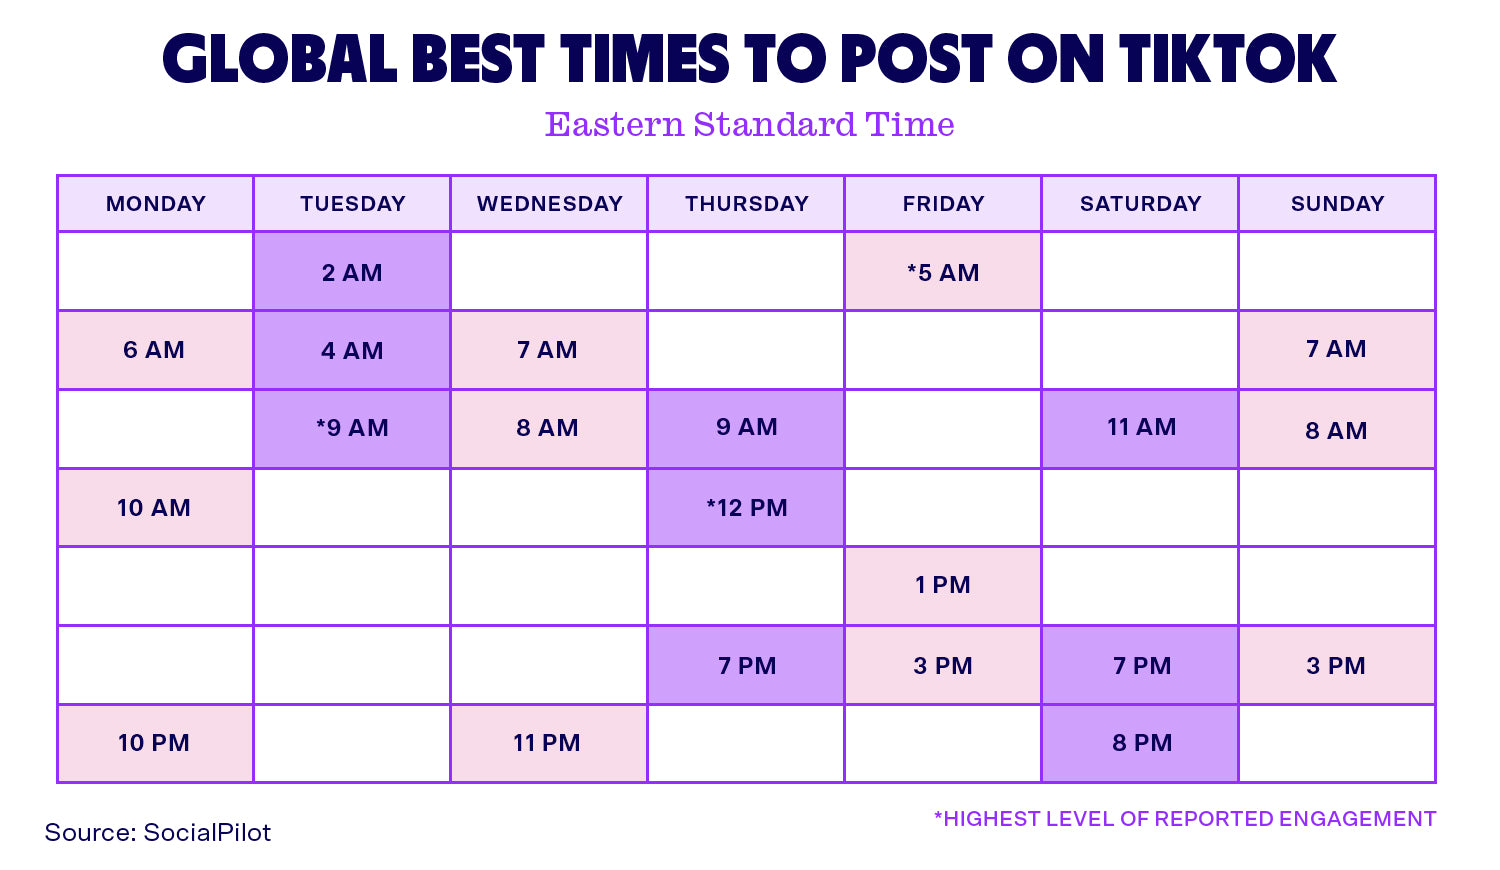 According to a study by SocialPilot, the time slots with the highest engagement in Australia are Tuesdays at 9 am and Thursdays at 12 pm.